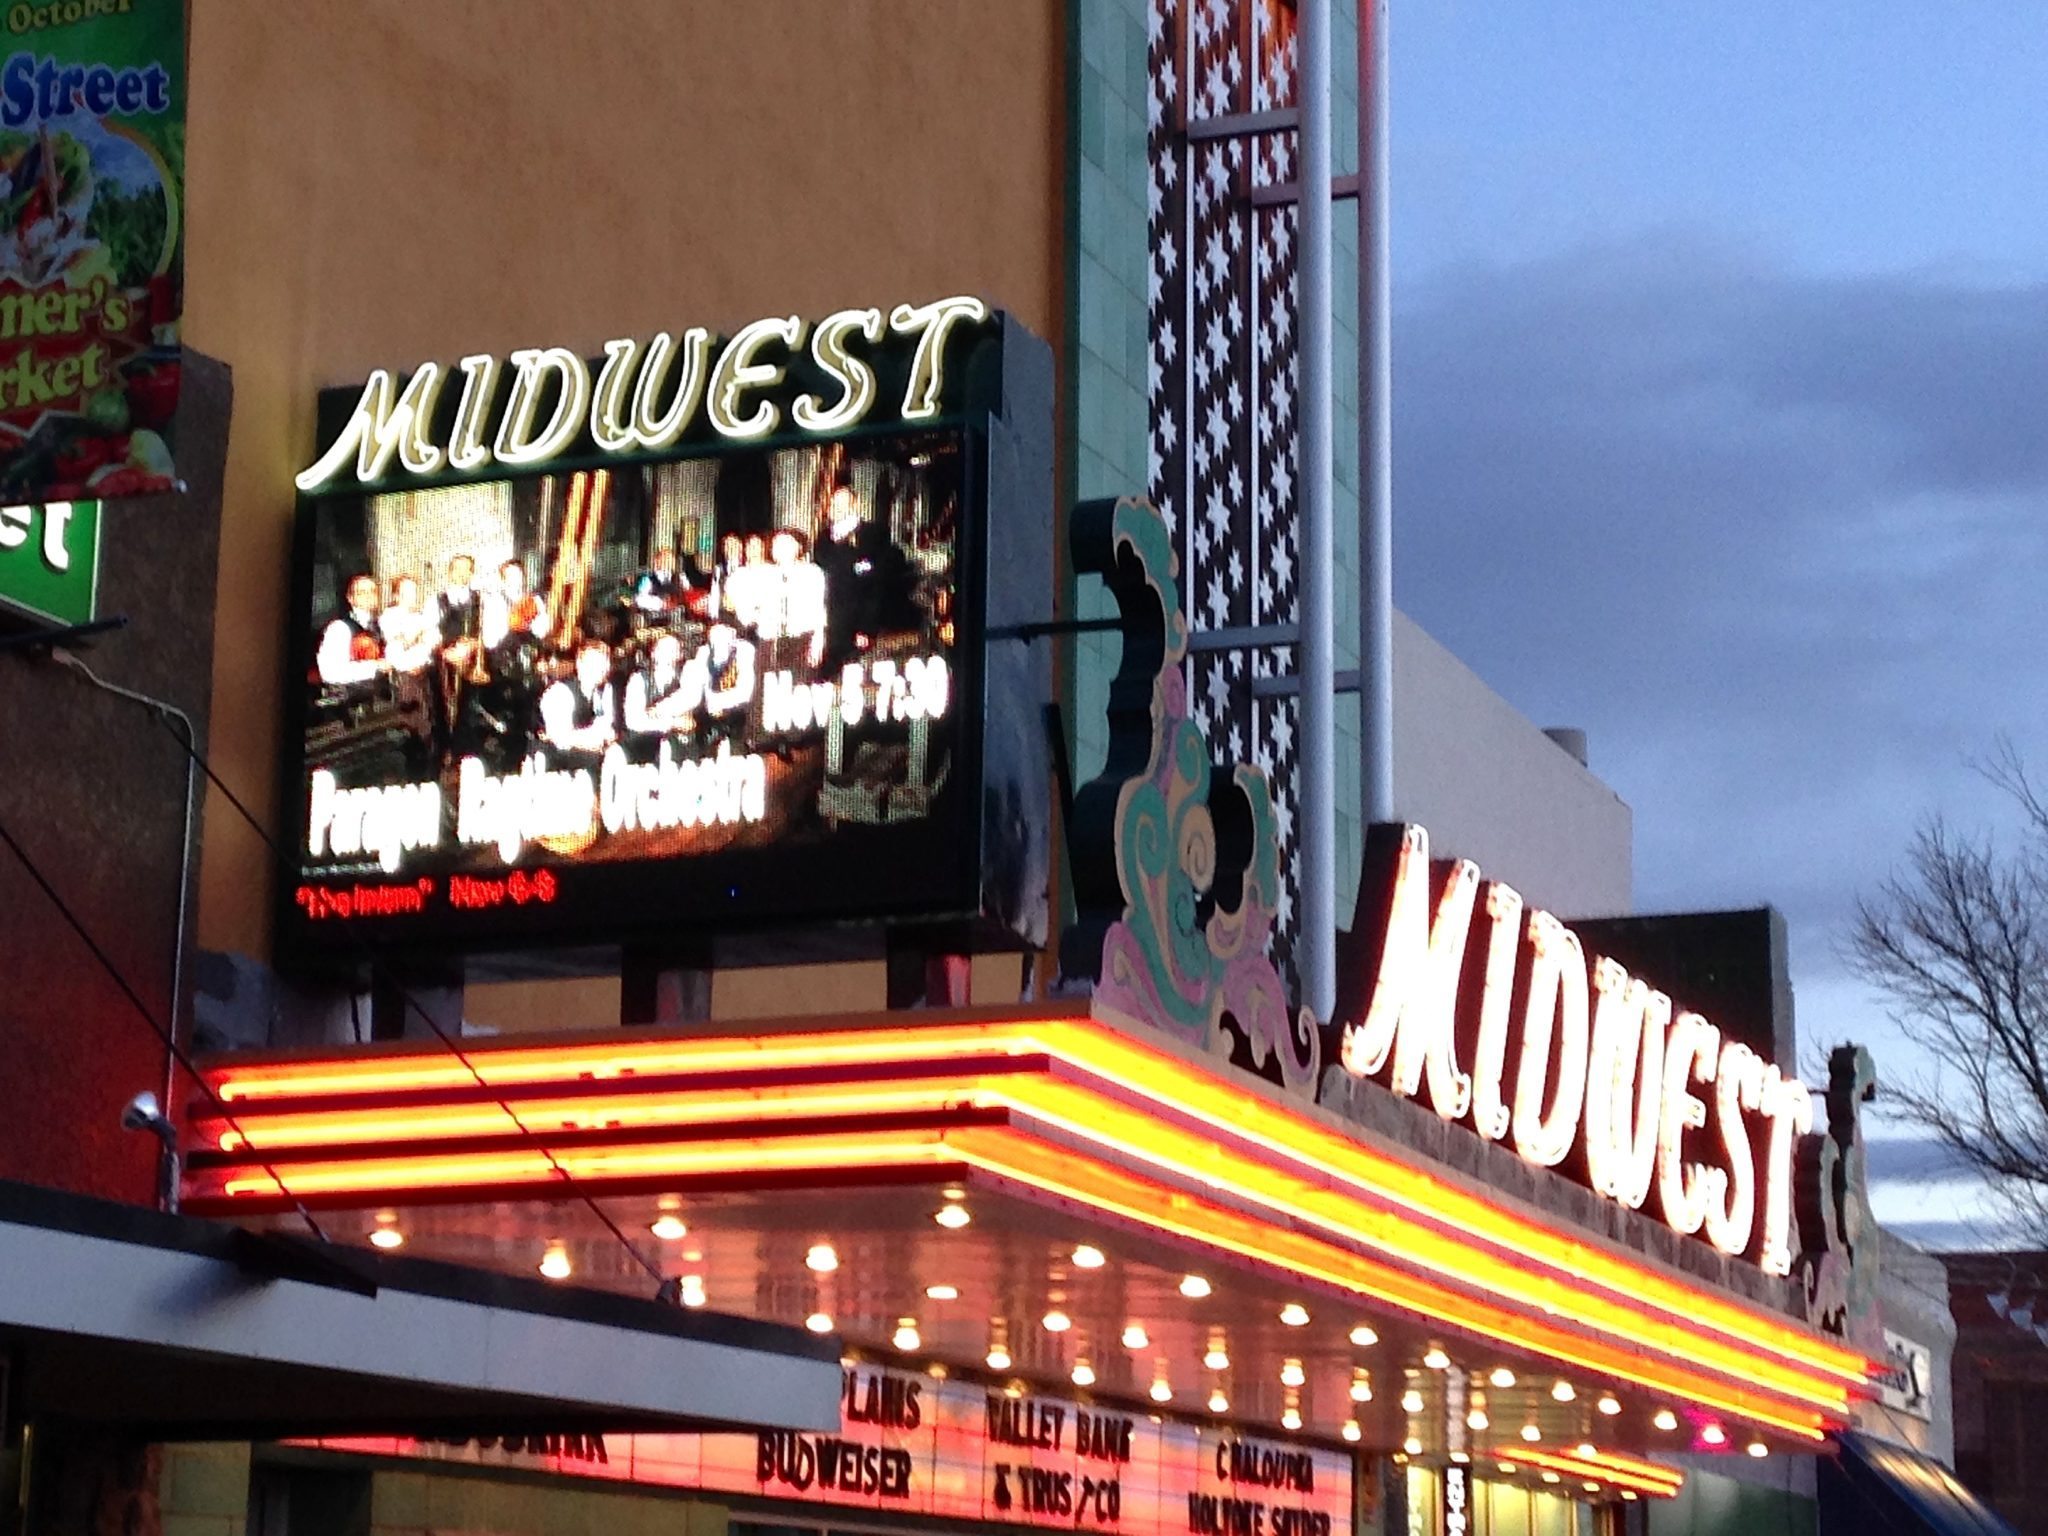 On the marquee: The PRO plays the historic Midwest Theatre in Scottsbluff, Nebraska.